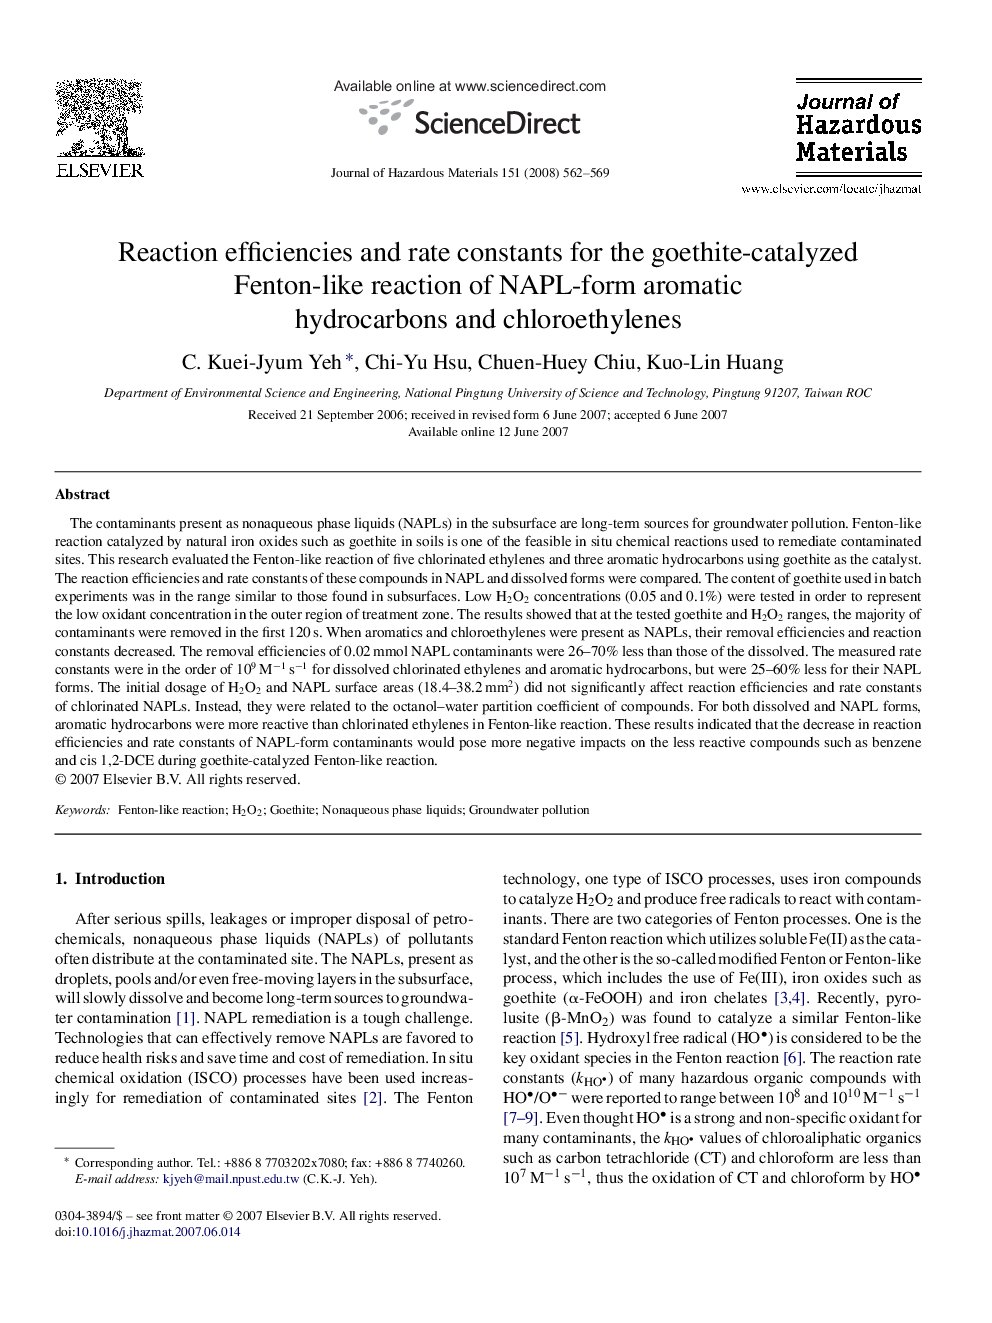 Reaction efficiencies and rate constants for the goethite-catalyzed Fenton-like reaction of NAPL-form aromatic hydrocarbons and chloroethylenes